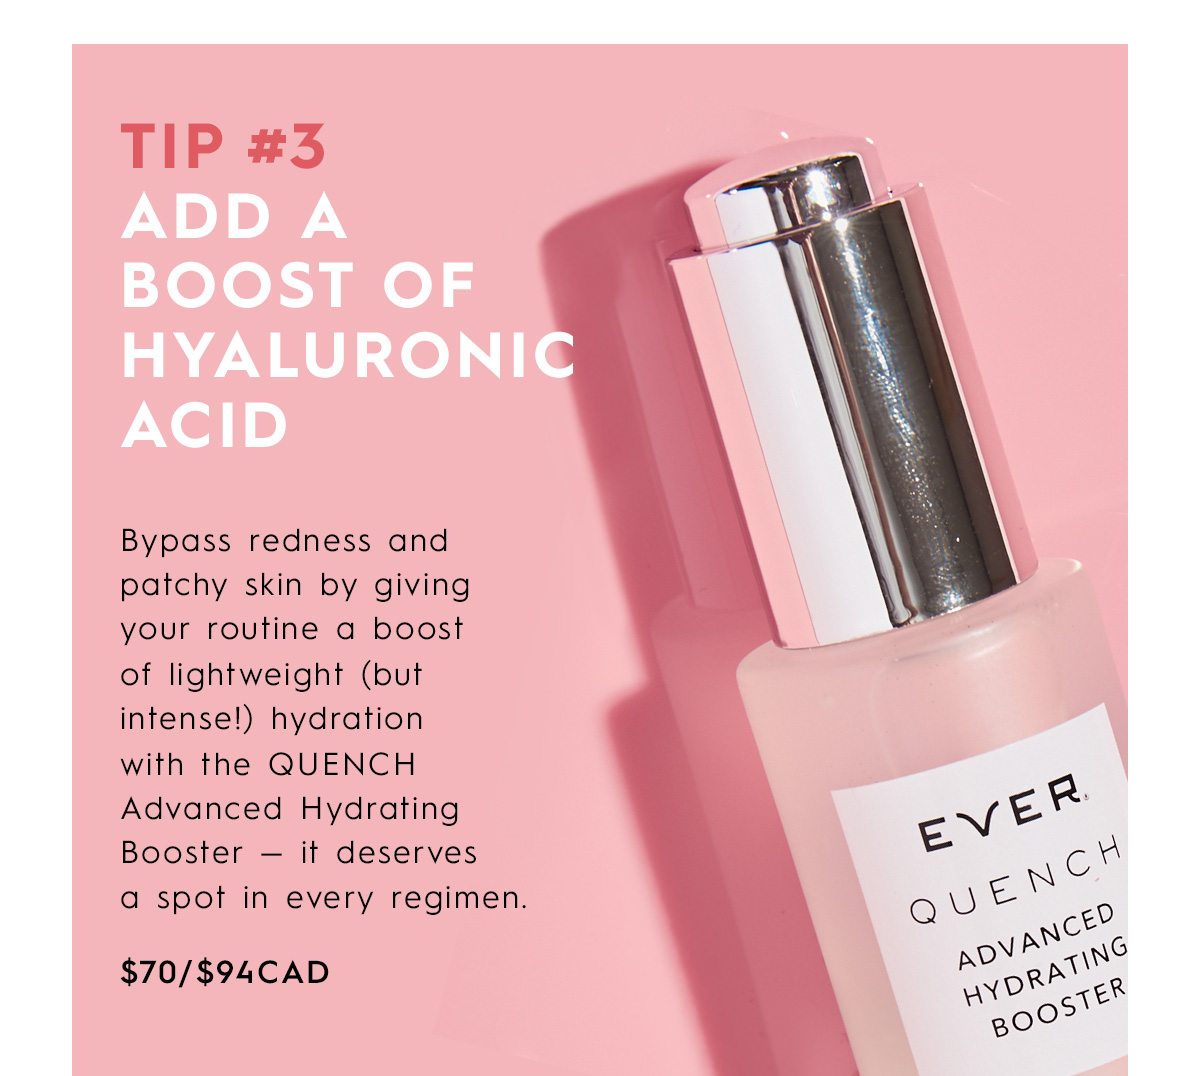 TIP #3 ADD A BOOST OF HYALURONIC ACID